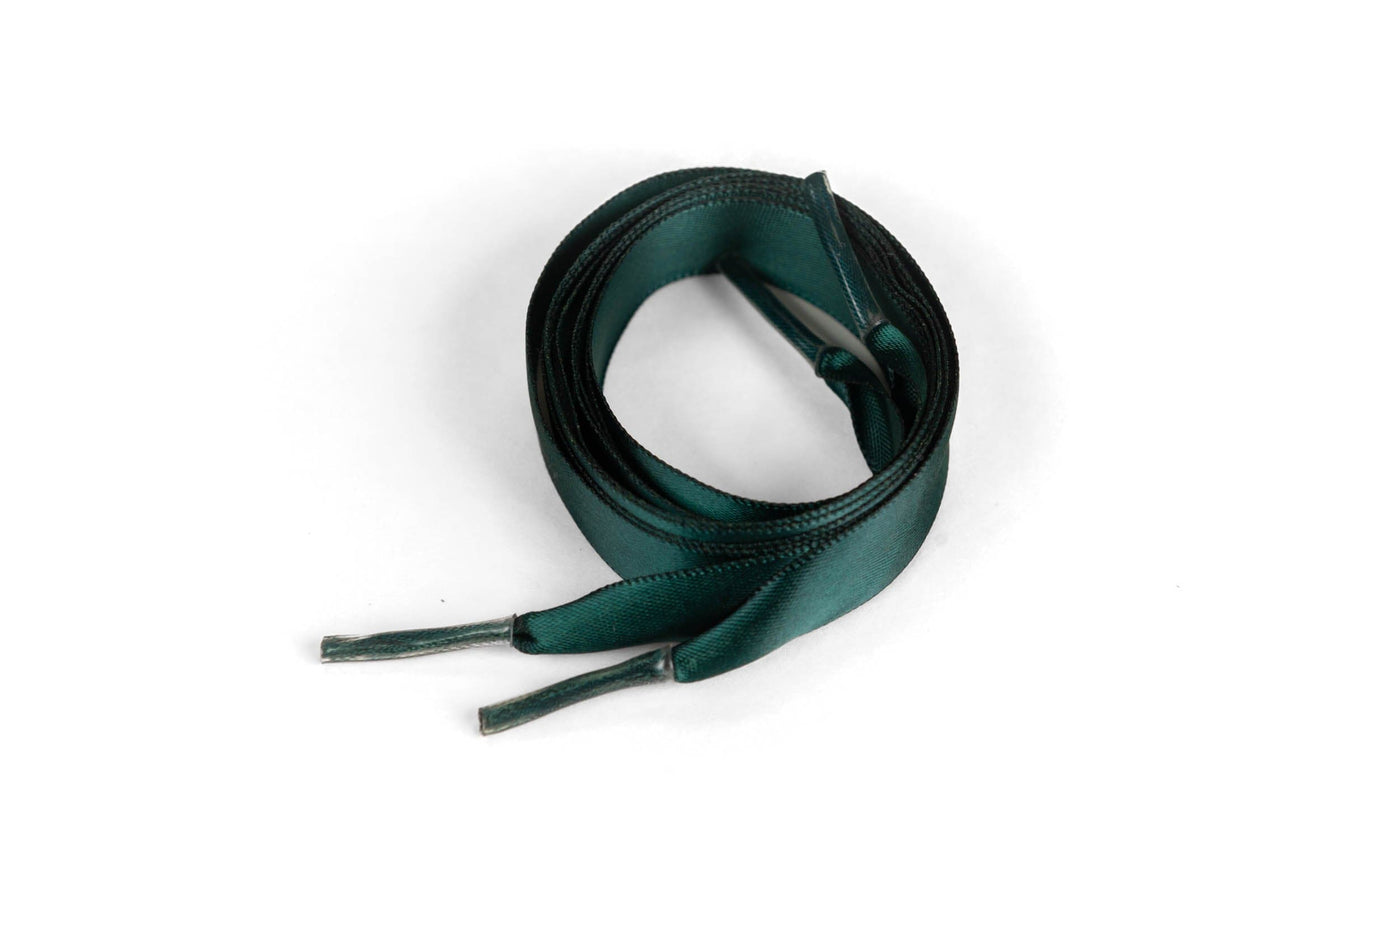 Satin Ribbon 5/8" Premium Quality Shoelaces - 48" Inch Length Teal